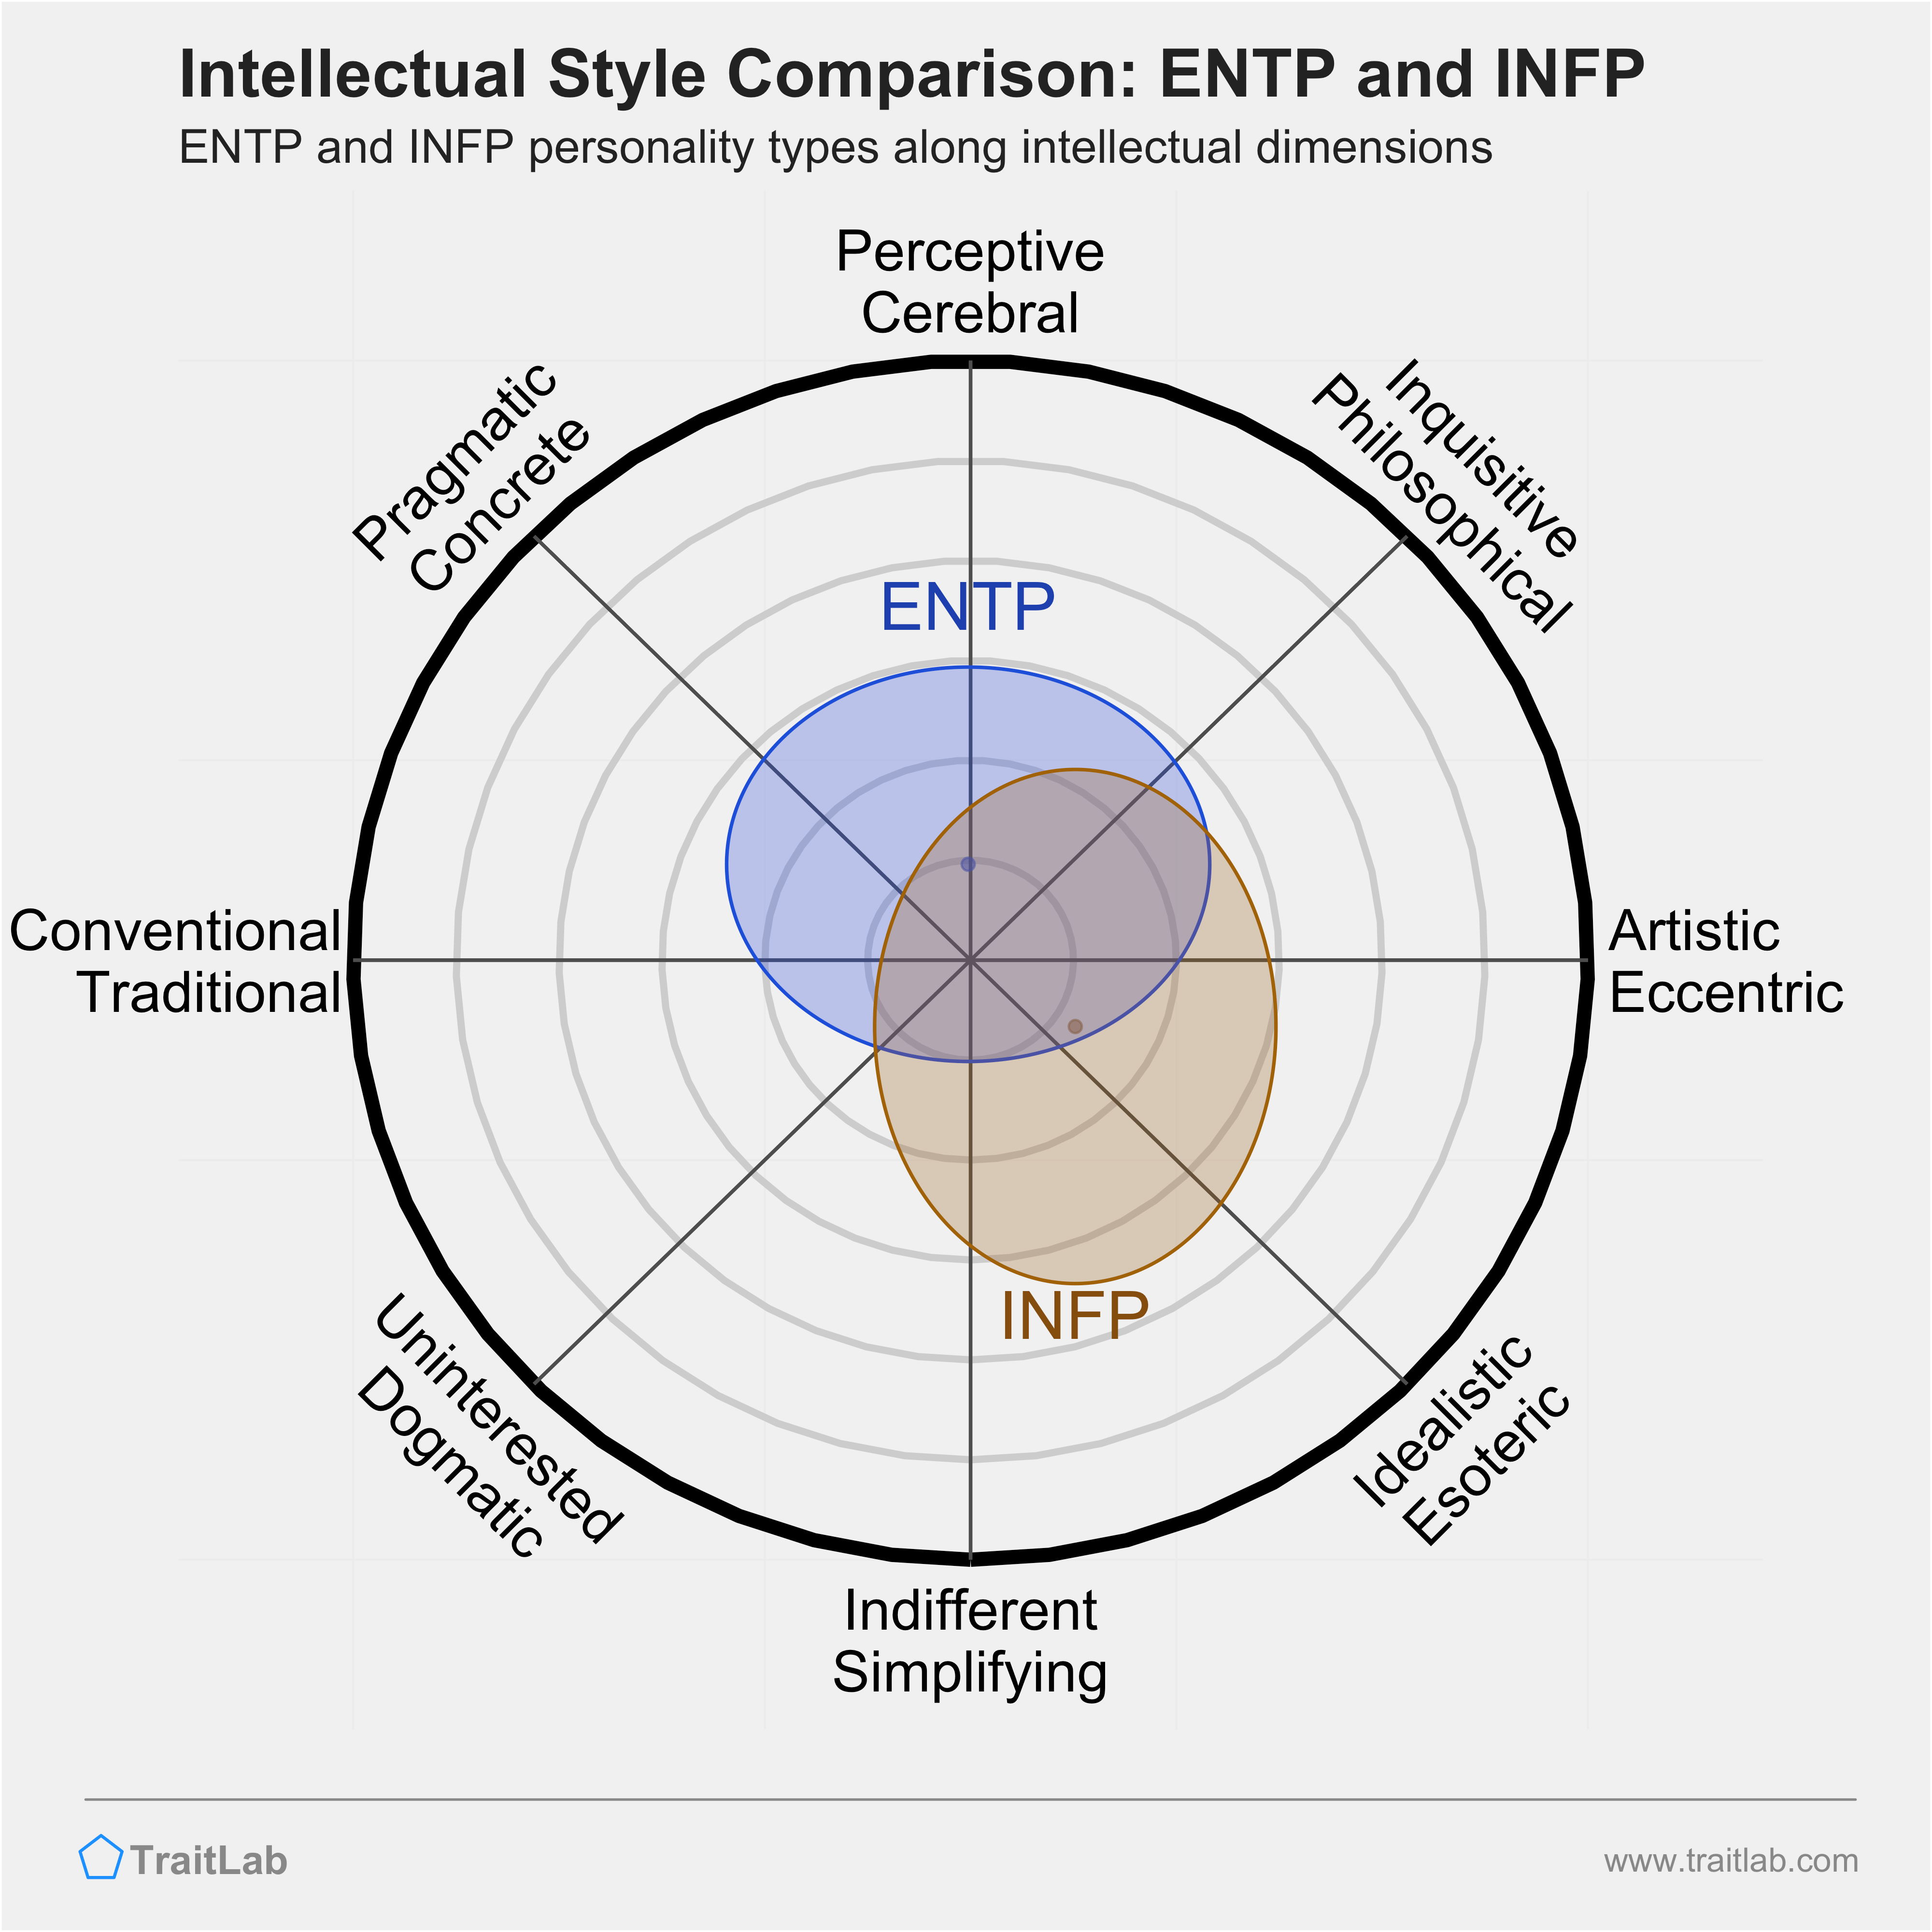 ENTP and INFP comparison across intellectual dimensions